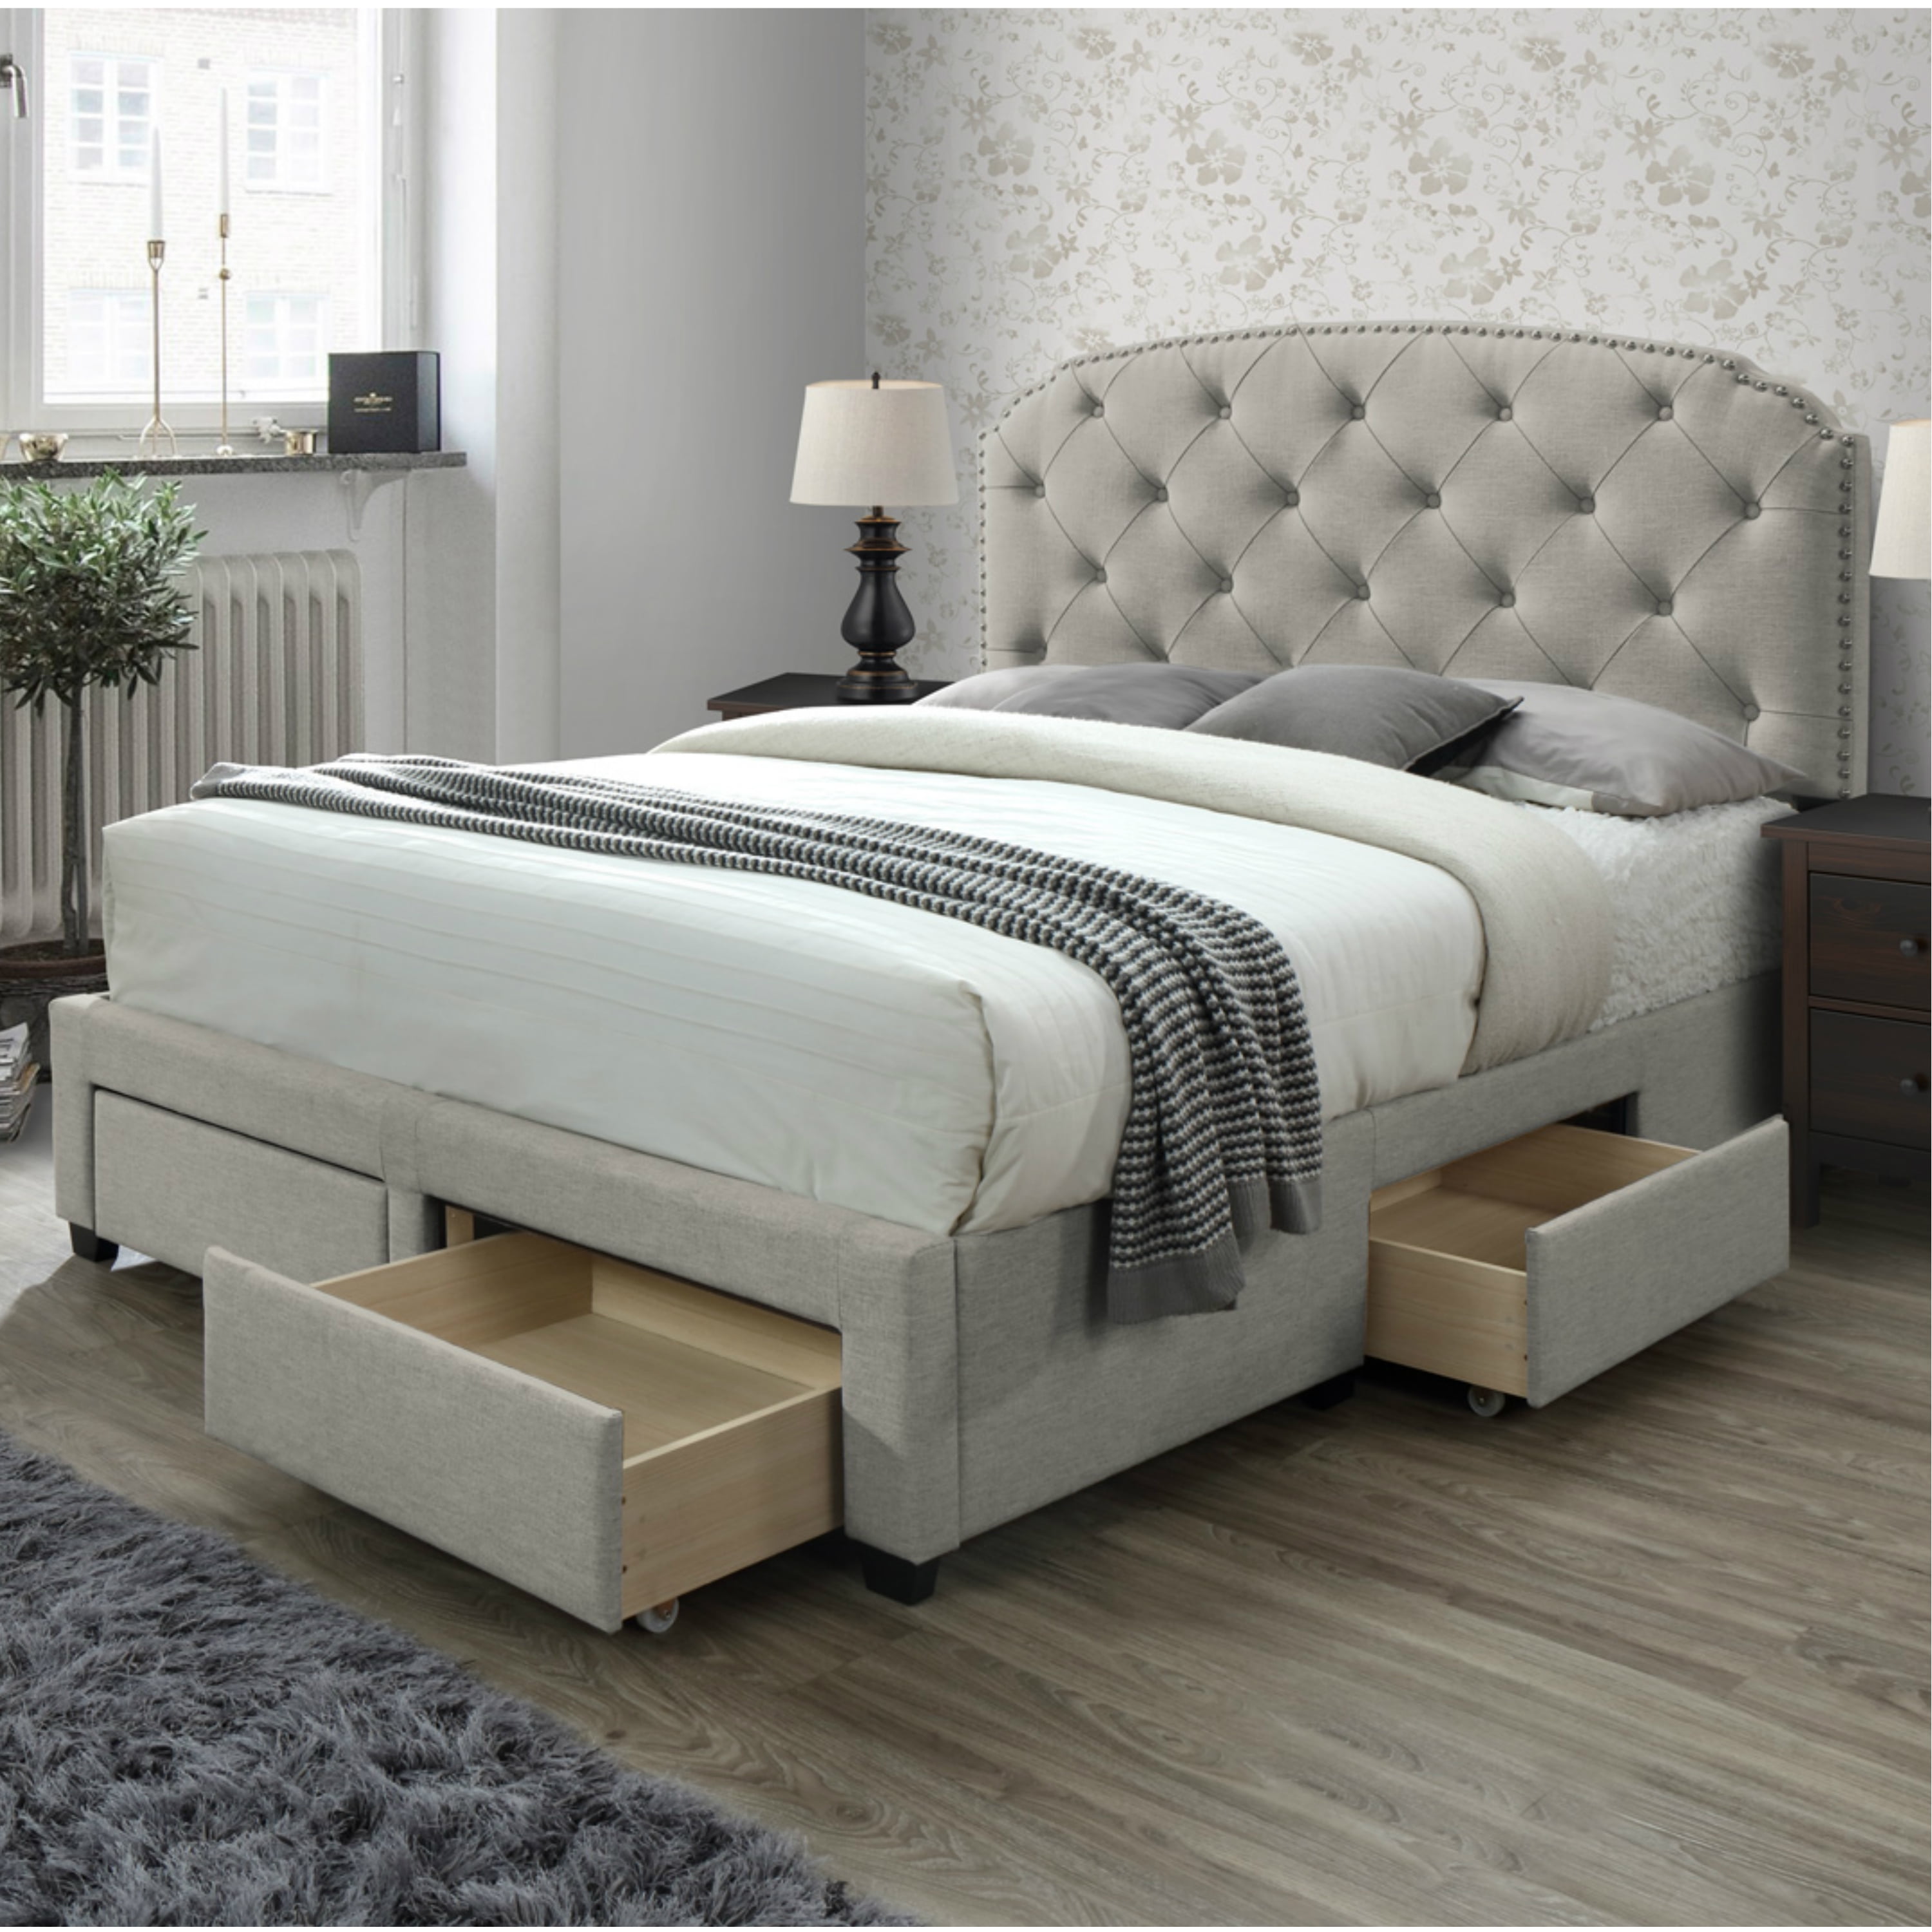 Dg Casa Argo Tufted Upholstered Panel, King Bed With Drawers